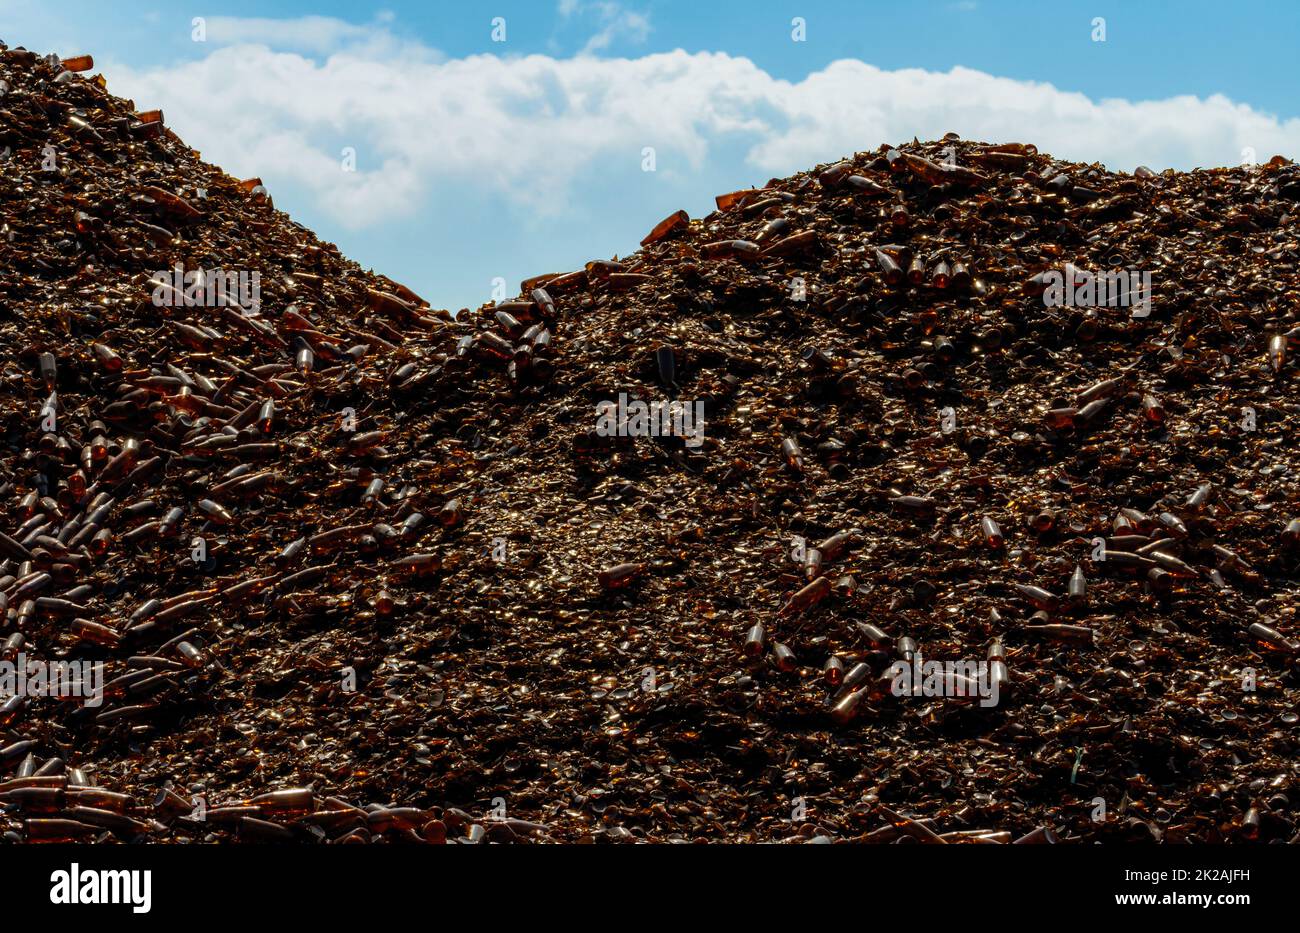 Pile of brown bottle for recycle in recycling factory. Glass waste for recycle. Dump of brown beer and wine glass bottle. Smashed glass bottle garbage. Recycling business. Sustainable glass packaging. Stock Photo